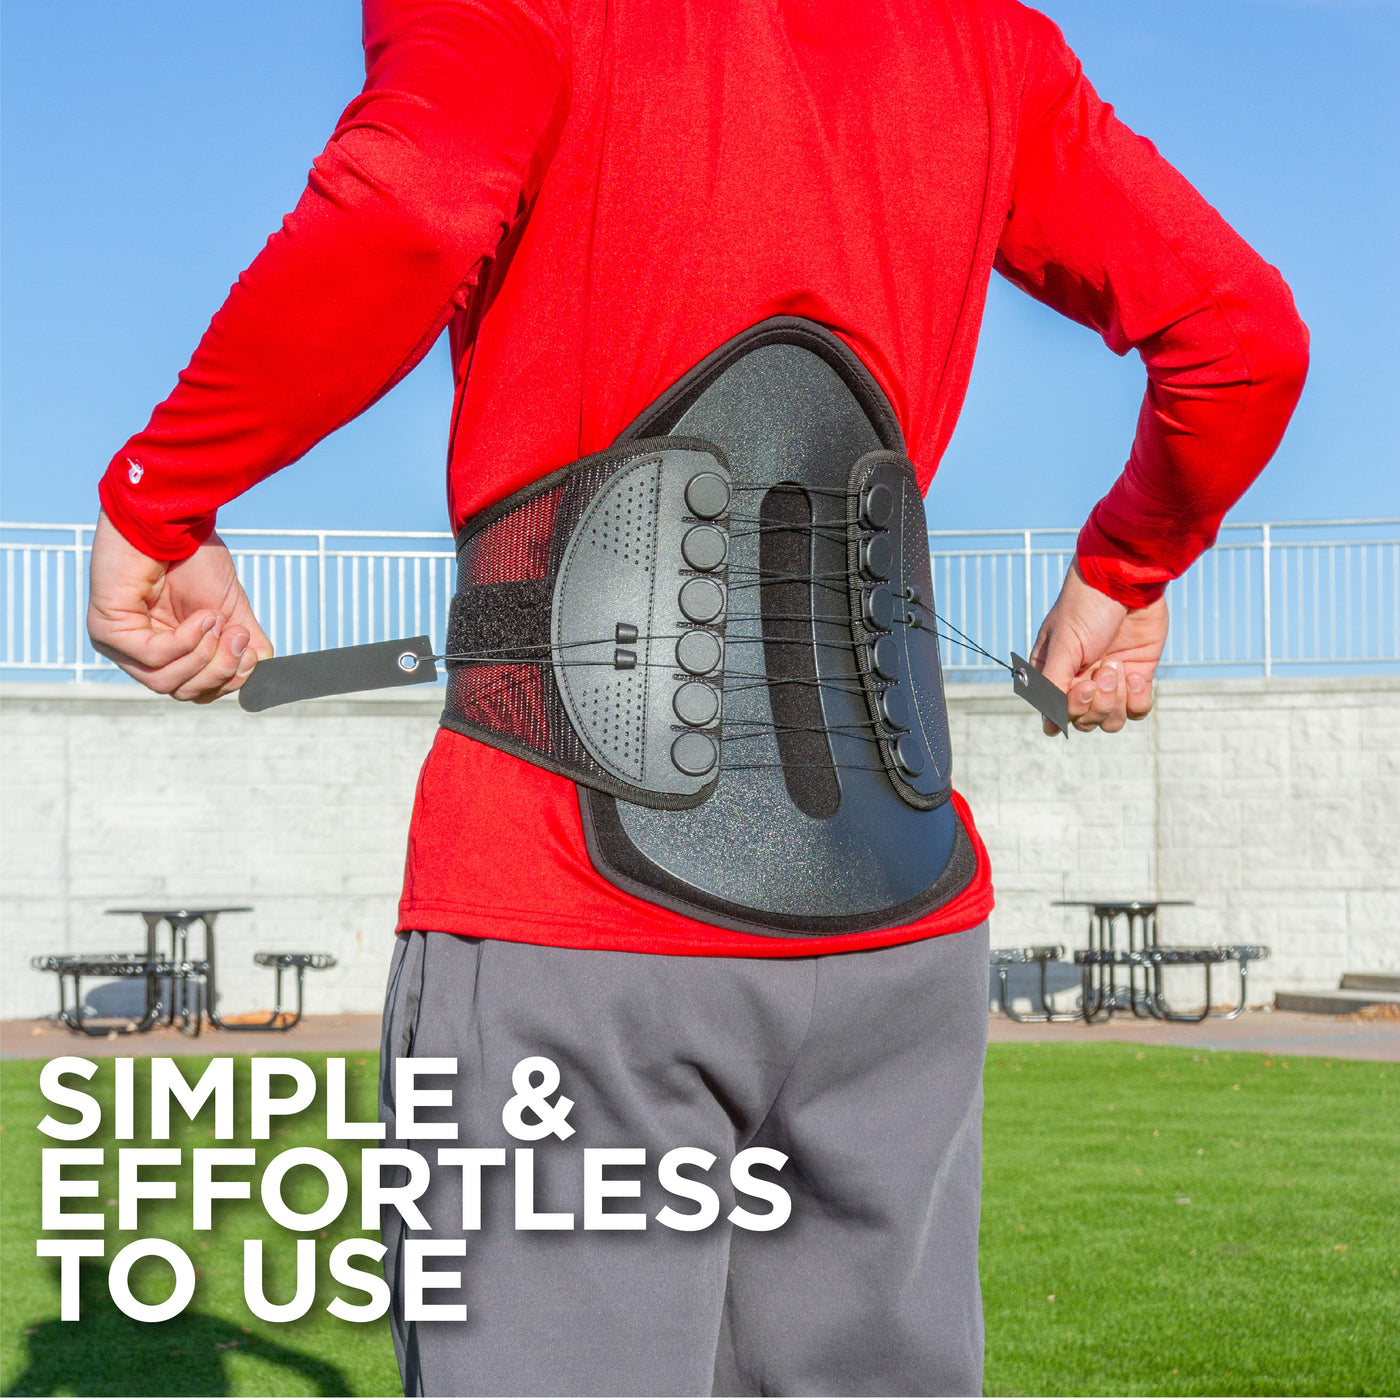 Our LSO back support is simple and effortless to use